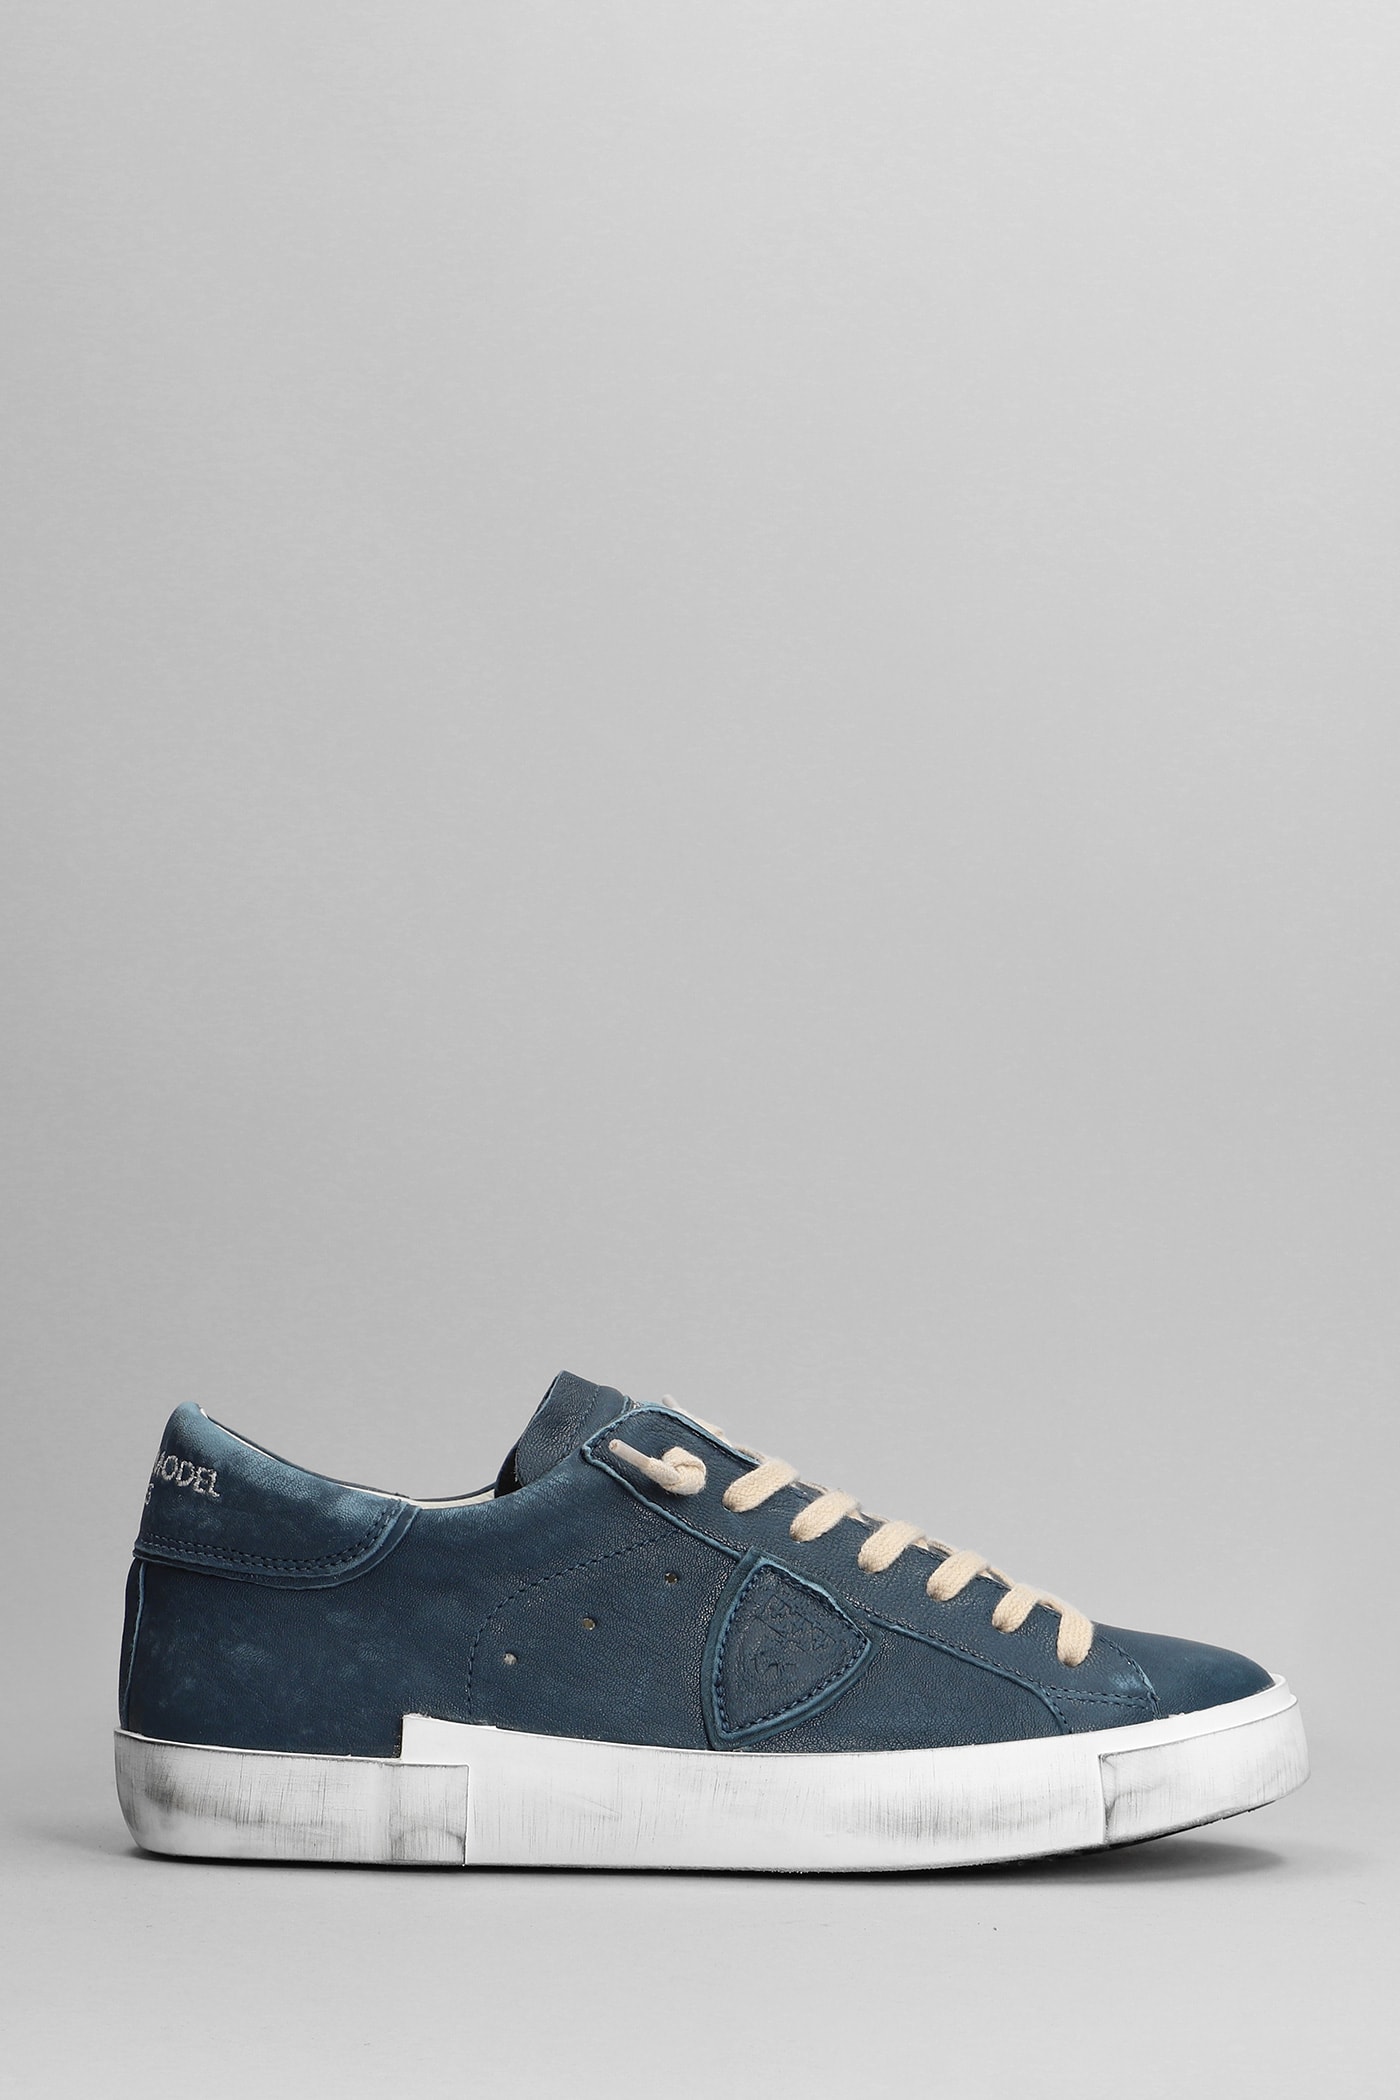 Philippe Model Prsx Sneakers In Blue Leather